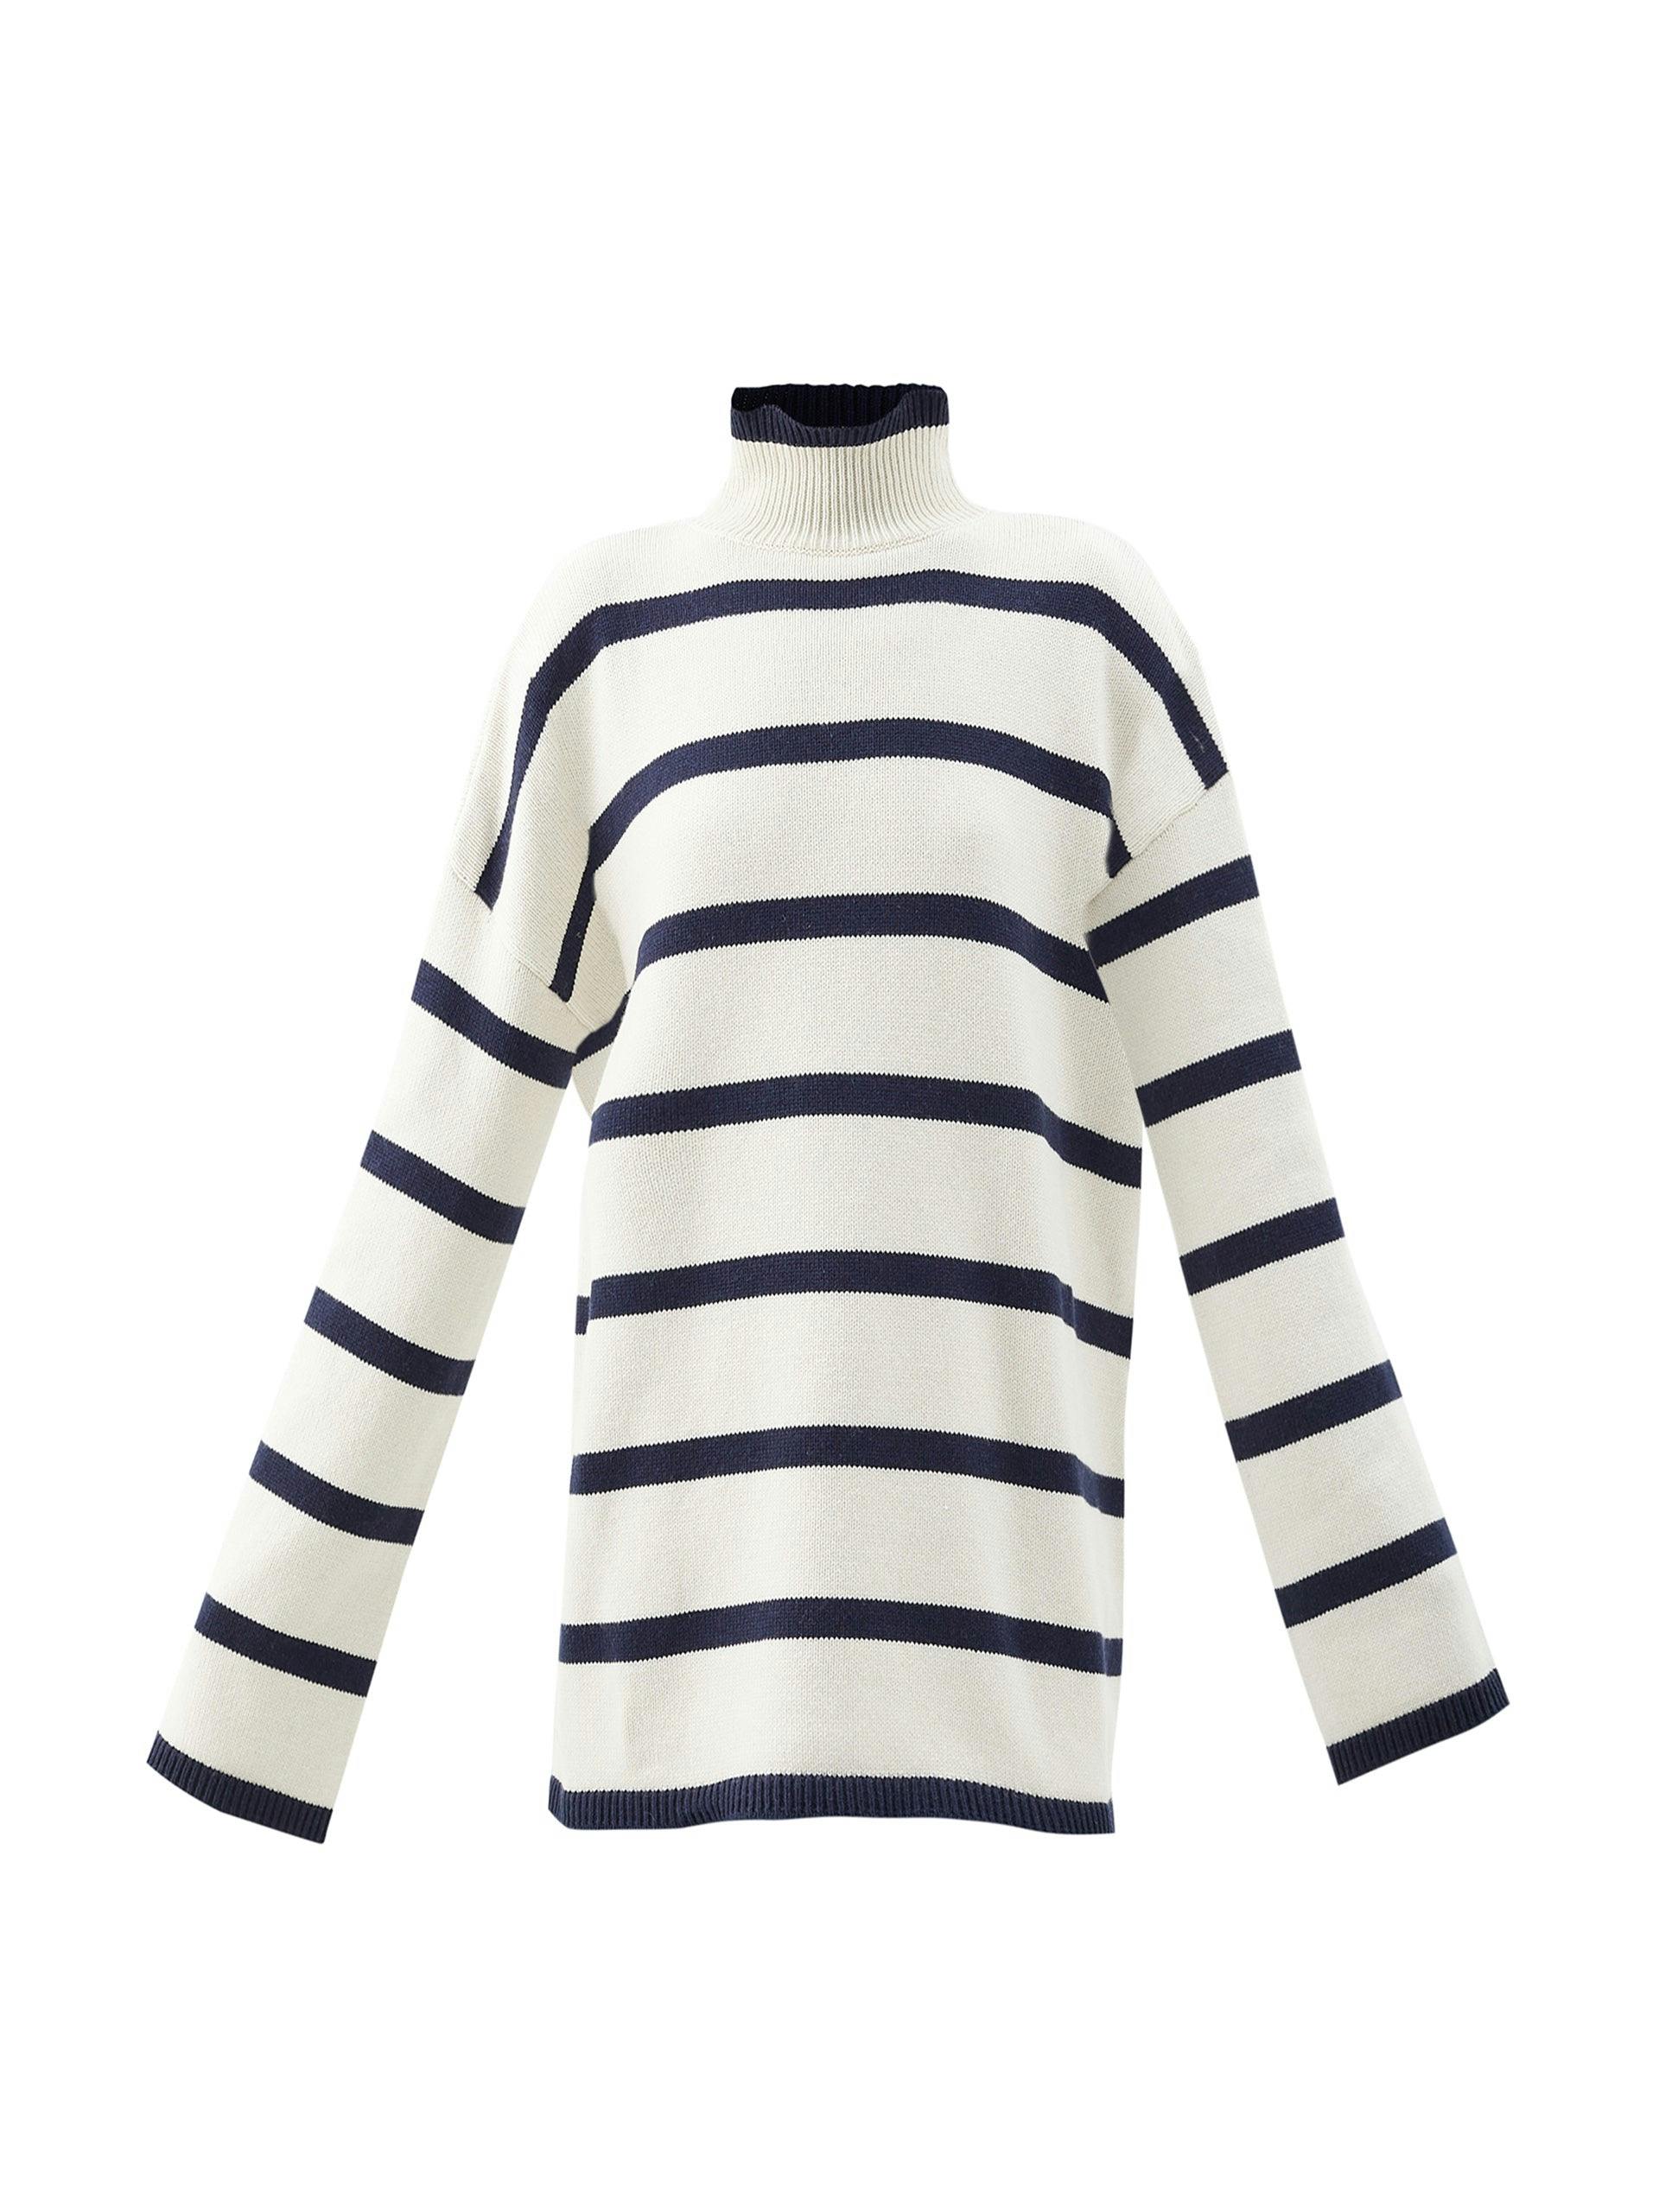 White jumper with blue stripes